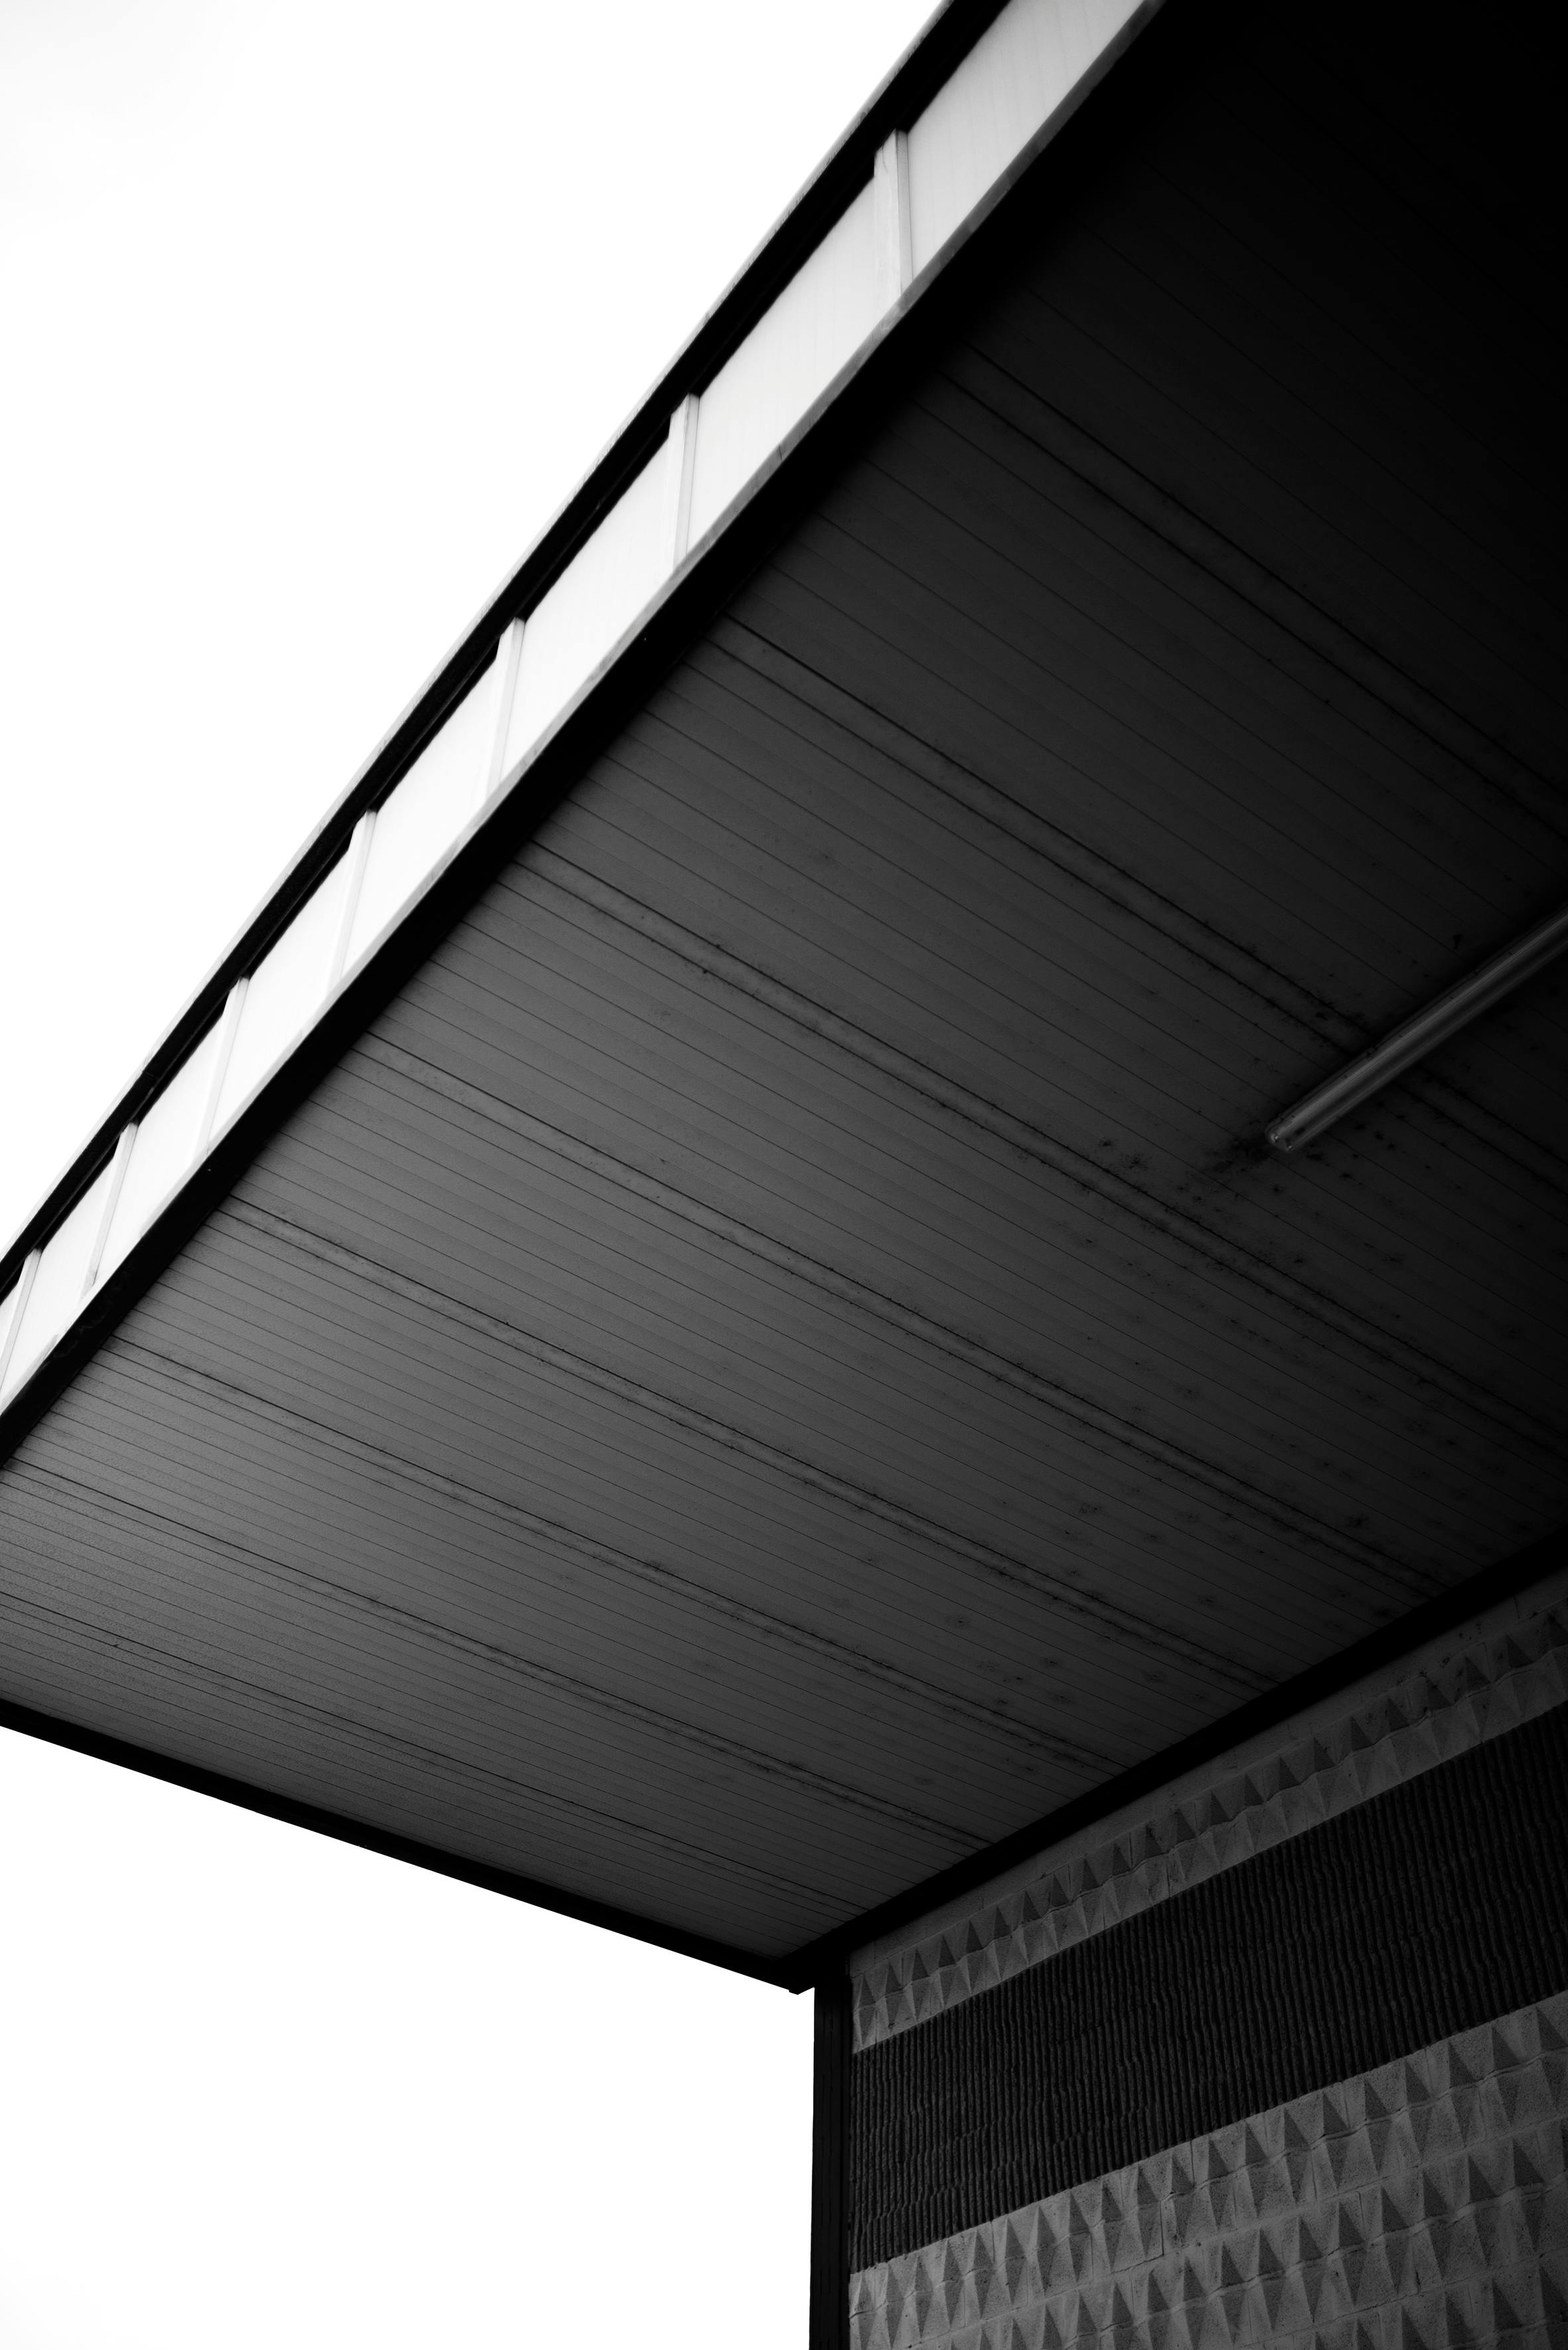 Free stock photo of architecture, black and white, lines